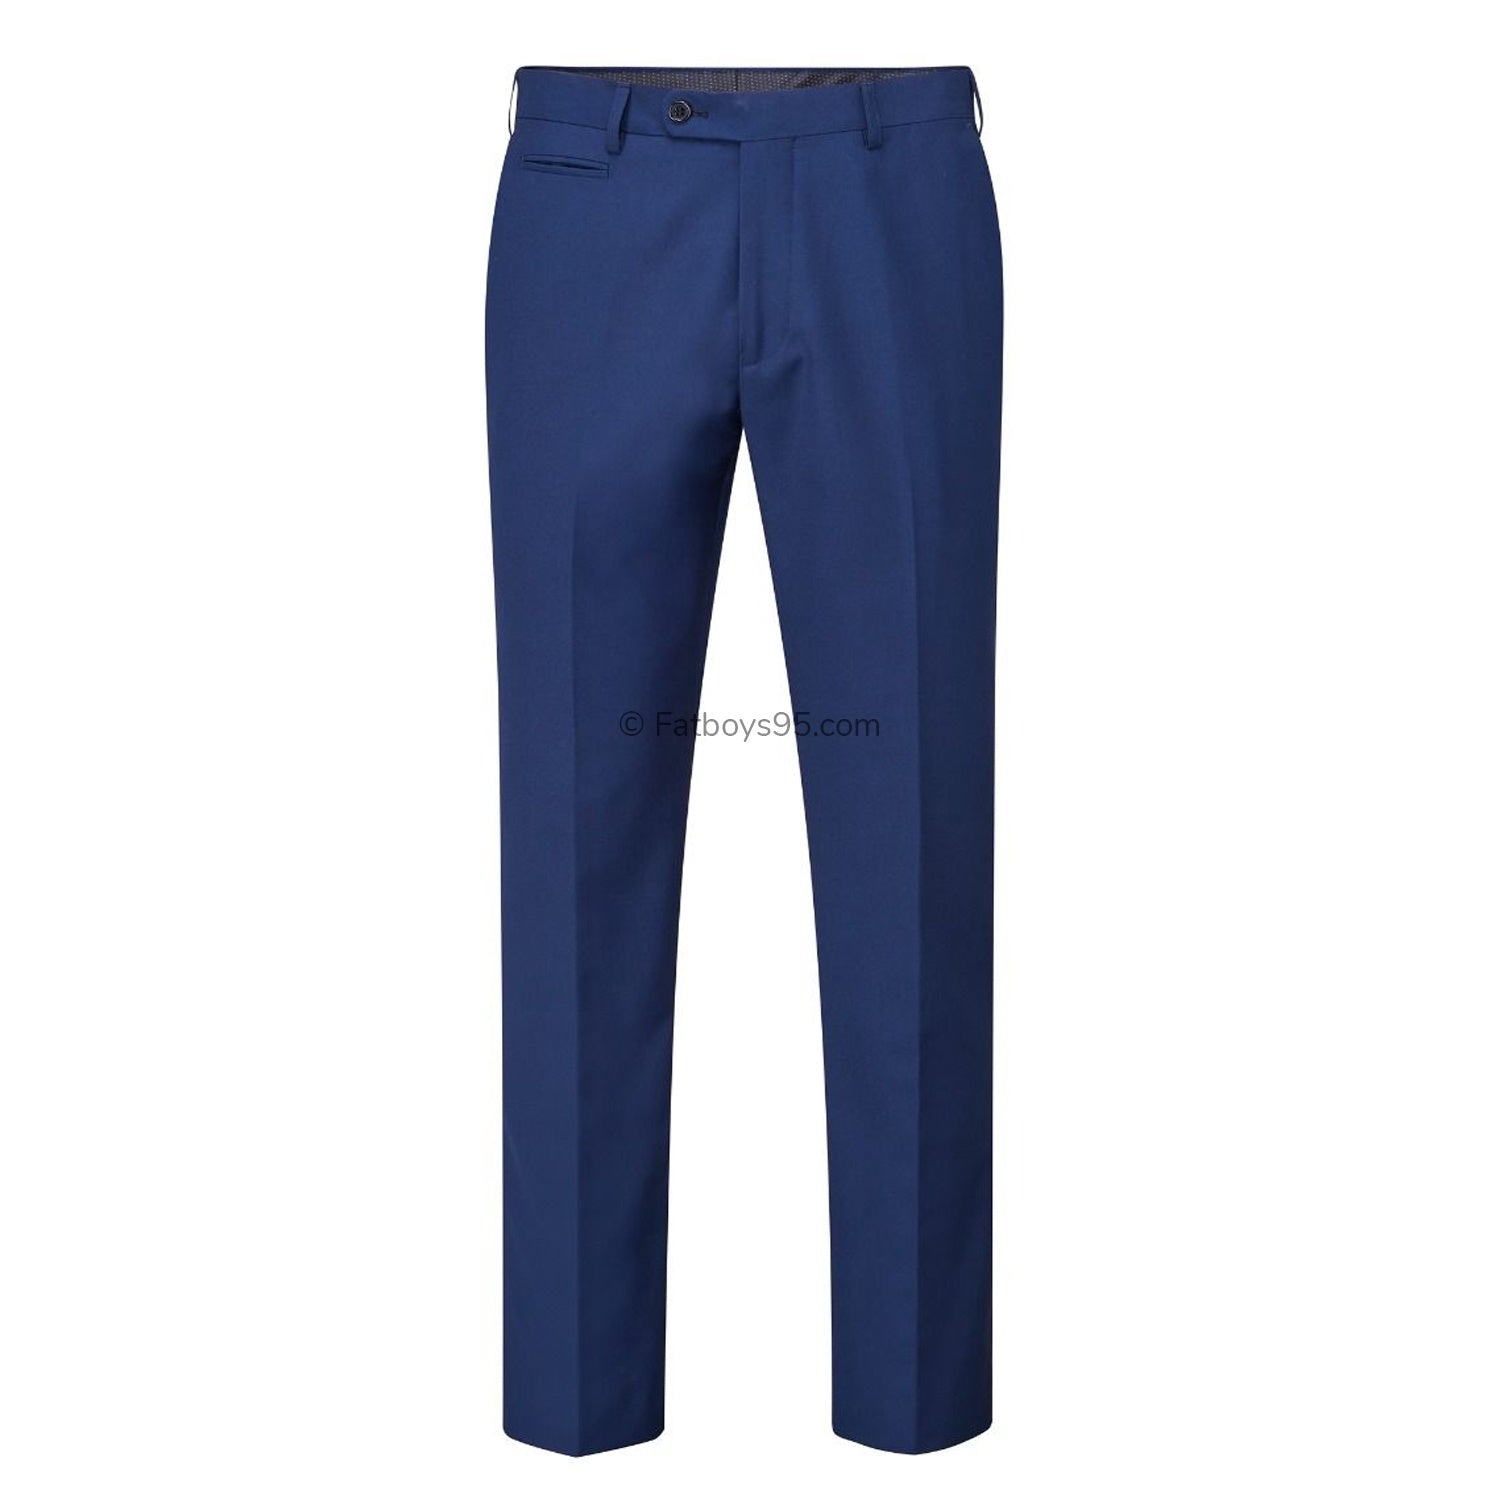 Skopes Suit Trousers - Kennedy - MM7694 - Royal Blue 1